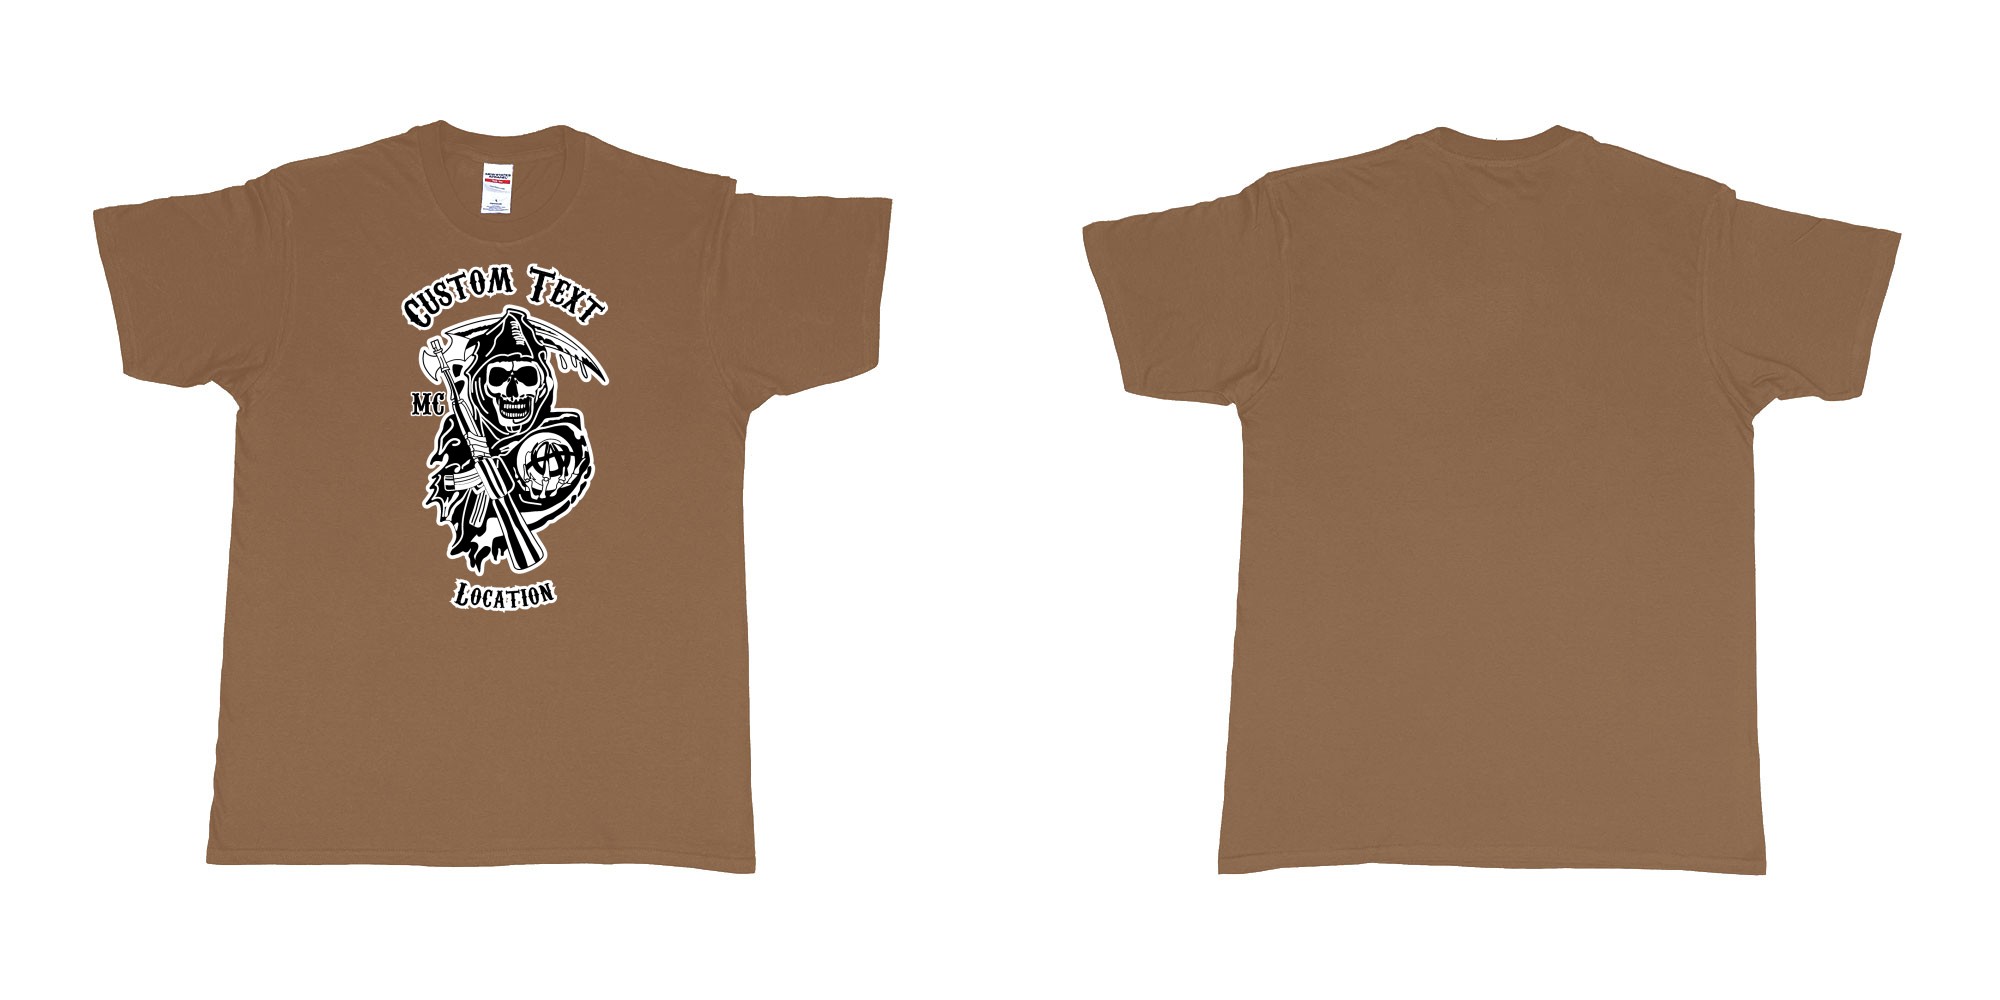 Custom tshirt design son of anarchy logo custom text in fabric color chestnut choice your own text made in Bali by The Pirate Way